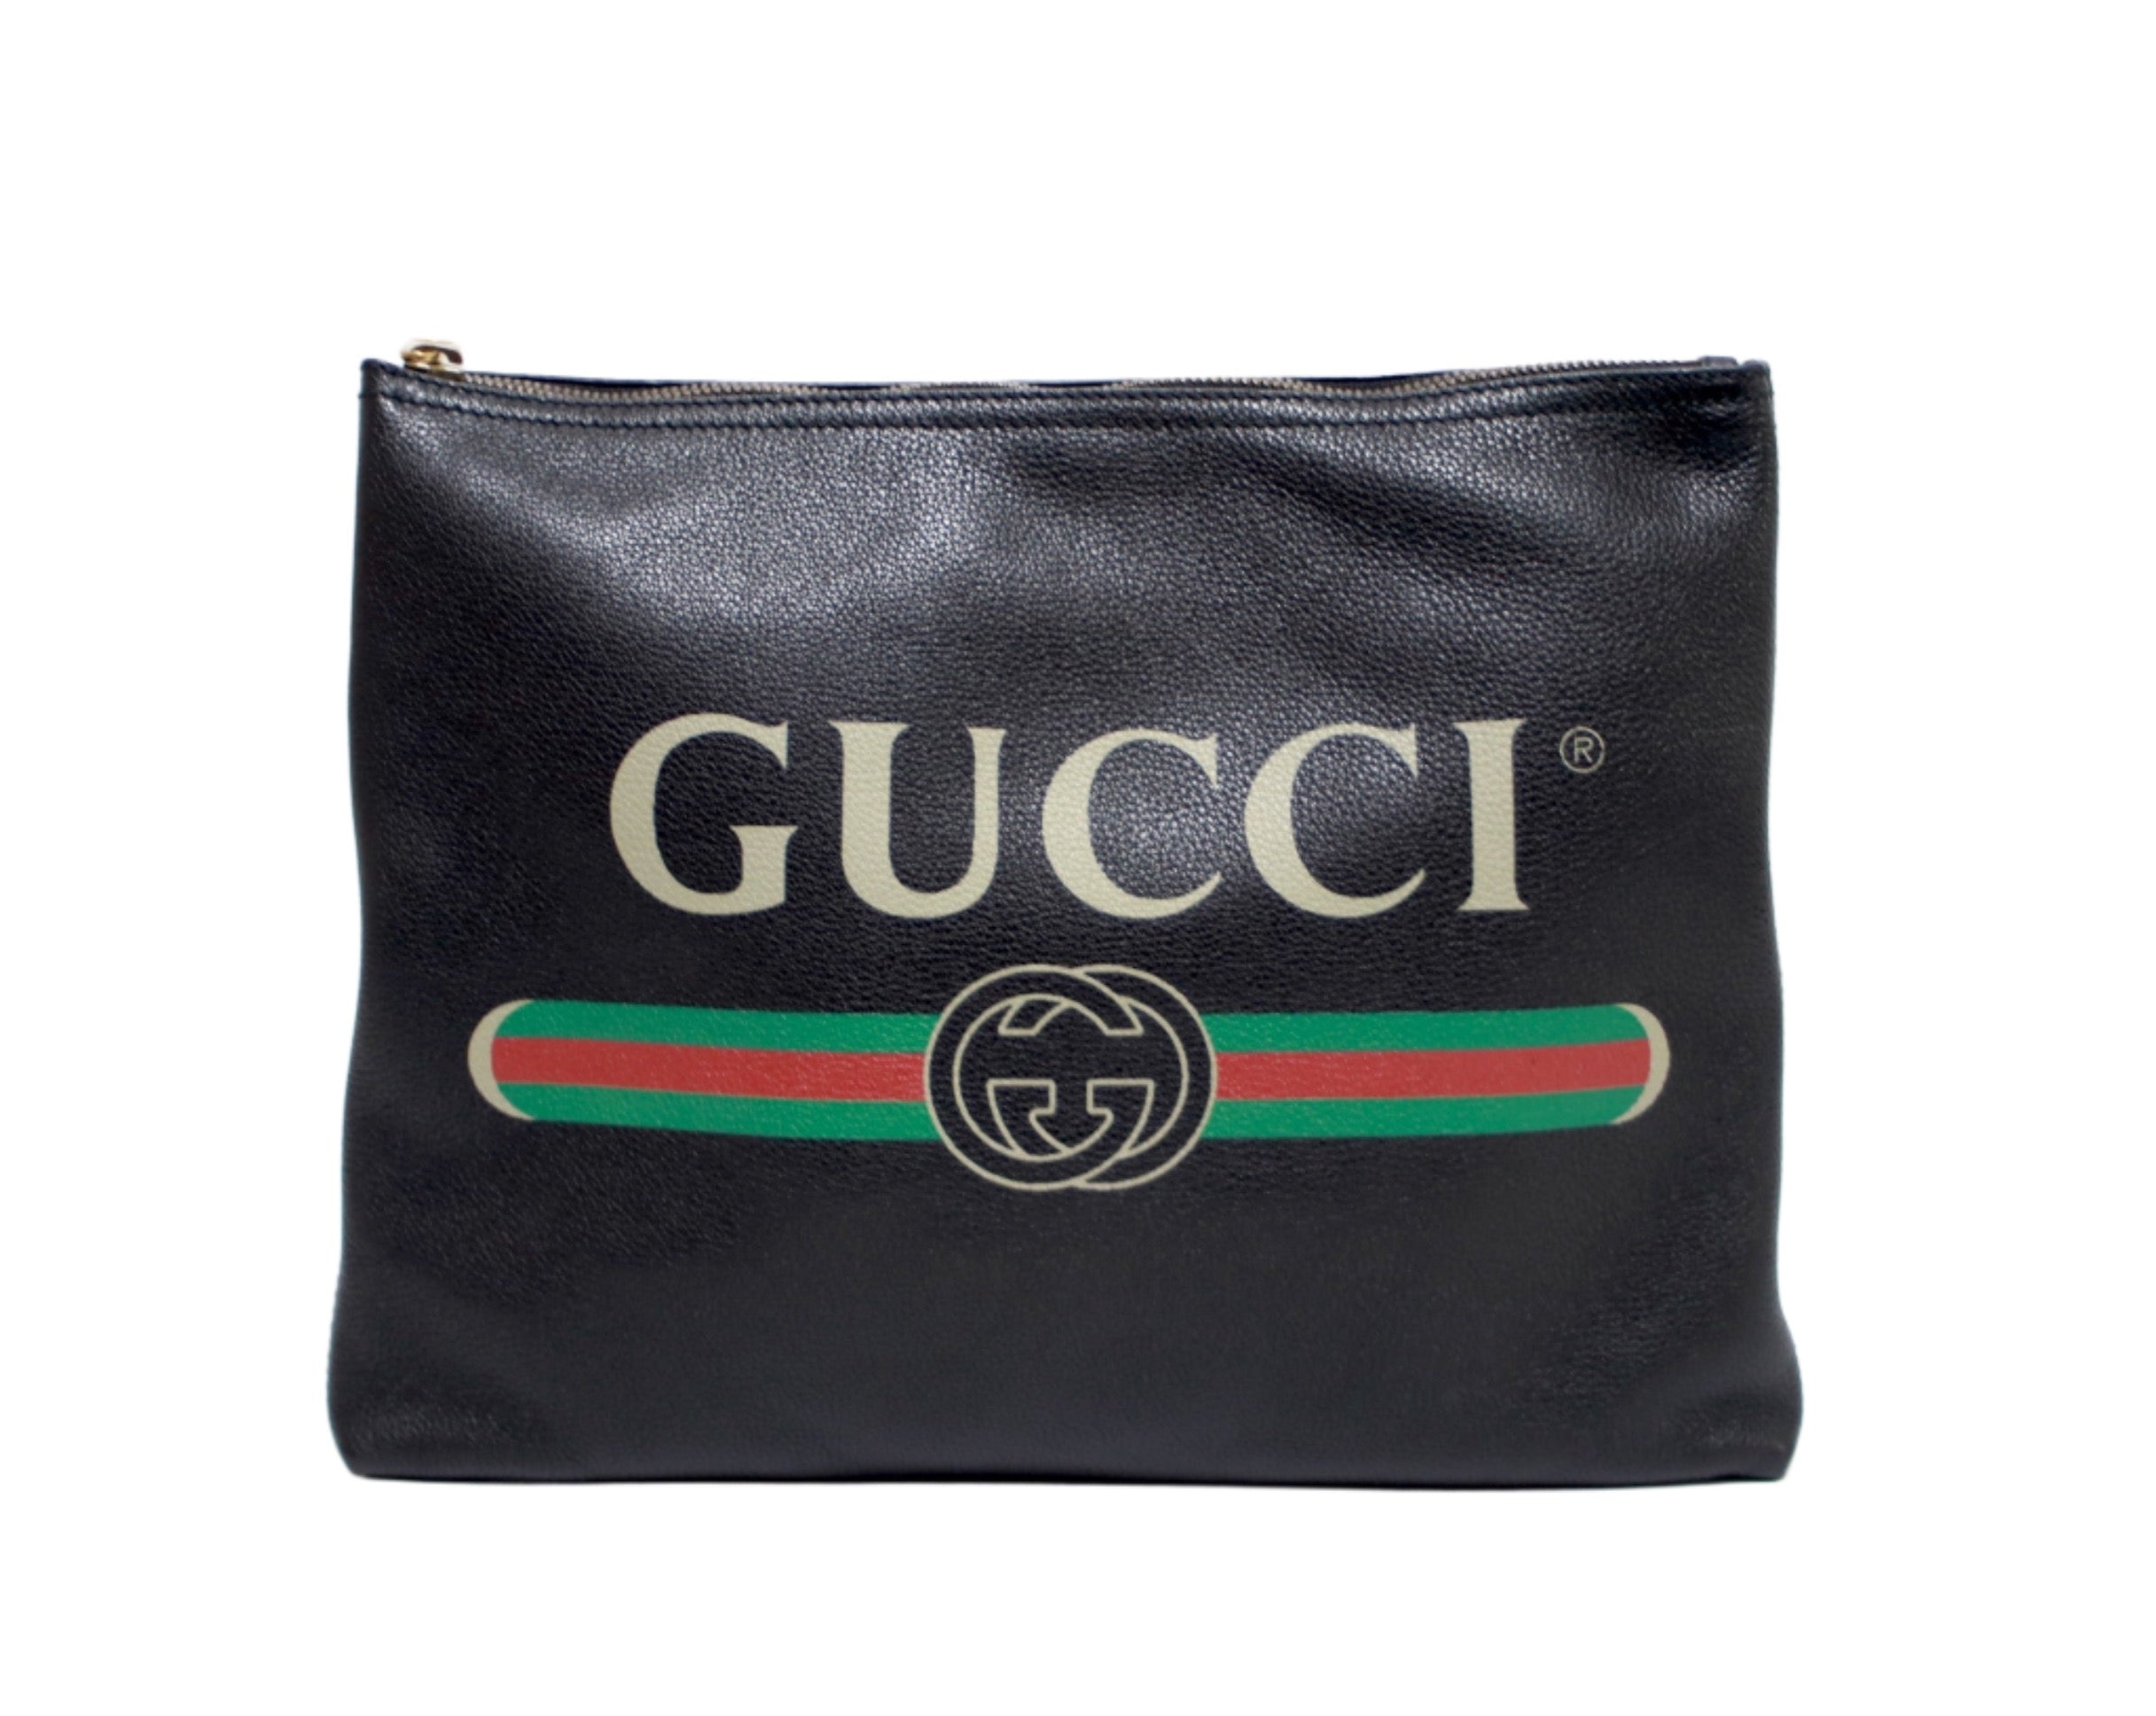 Gucci Leather Clutch Black Used (8086)